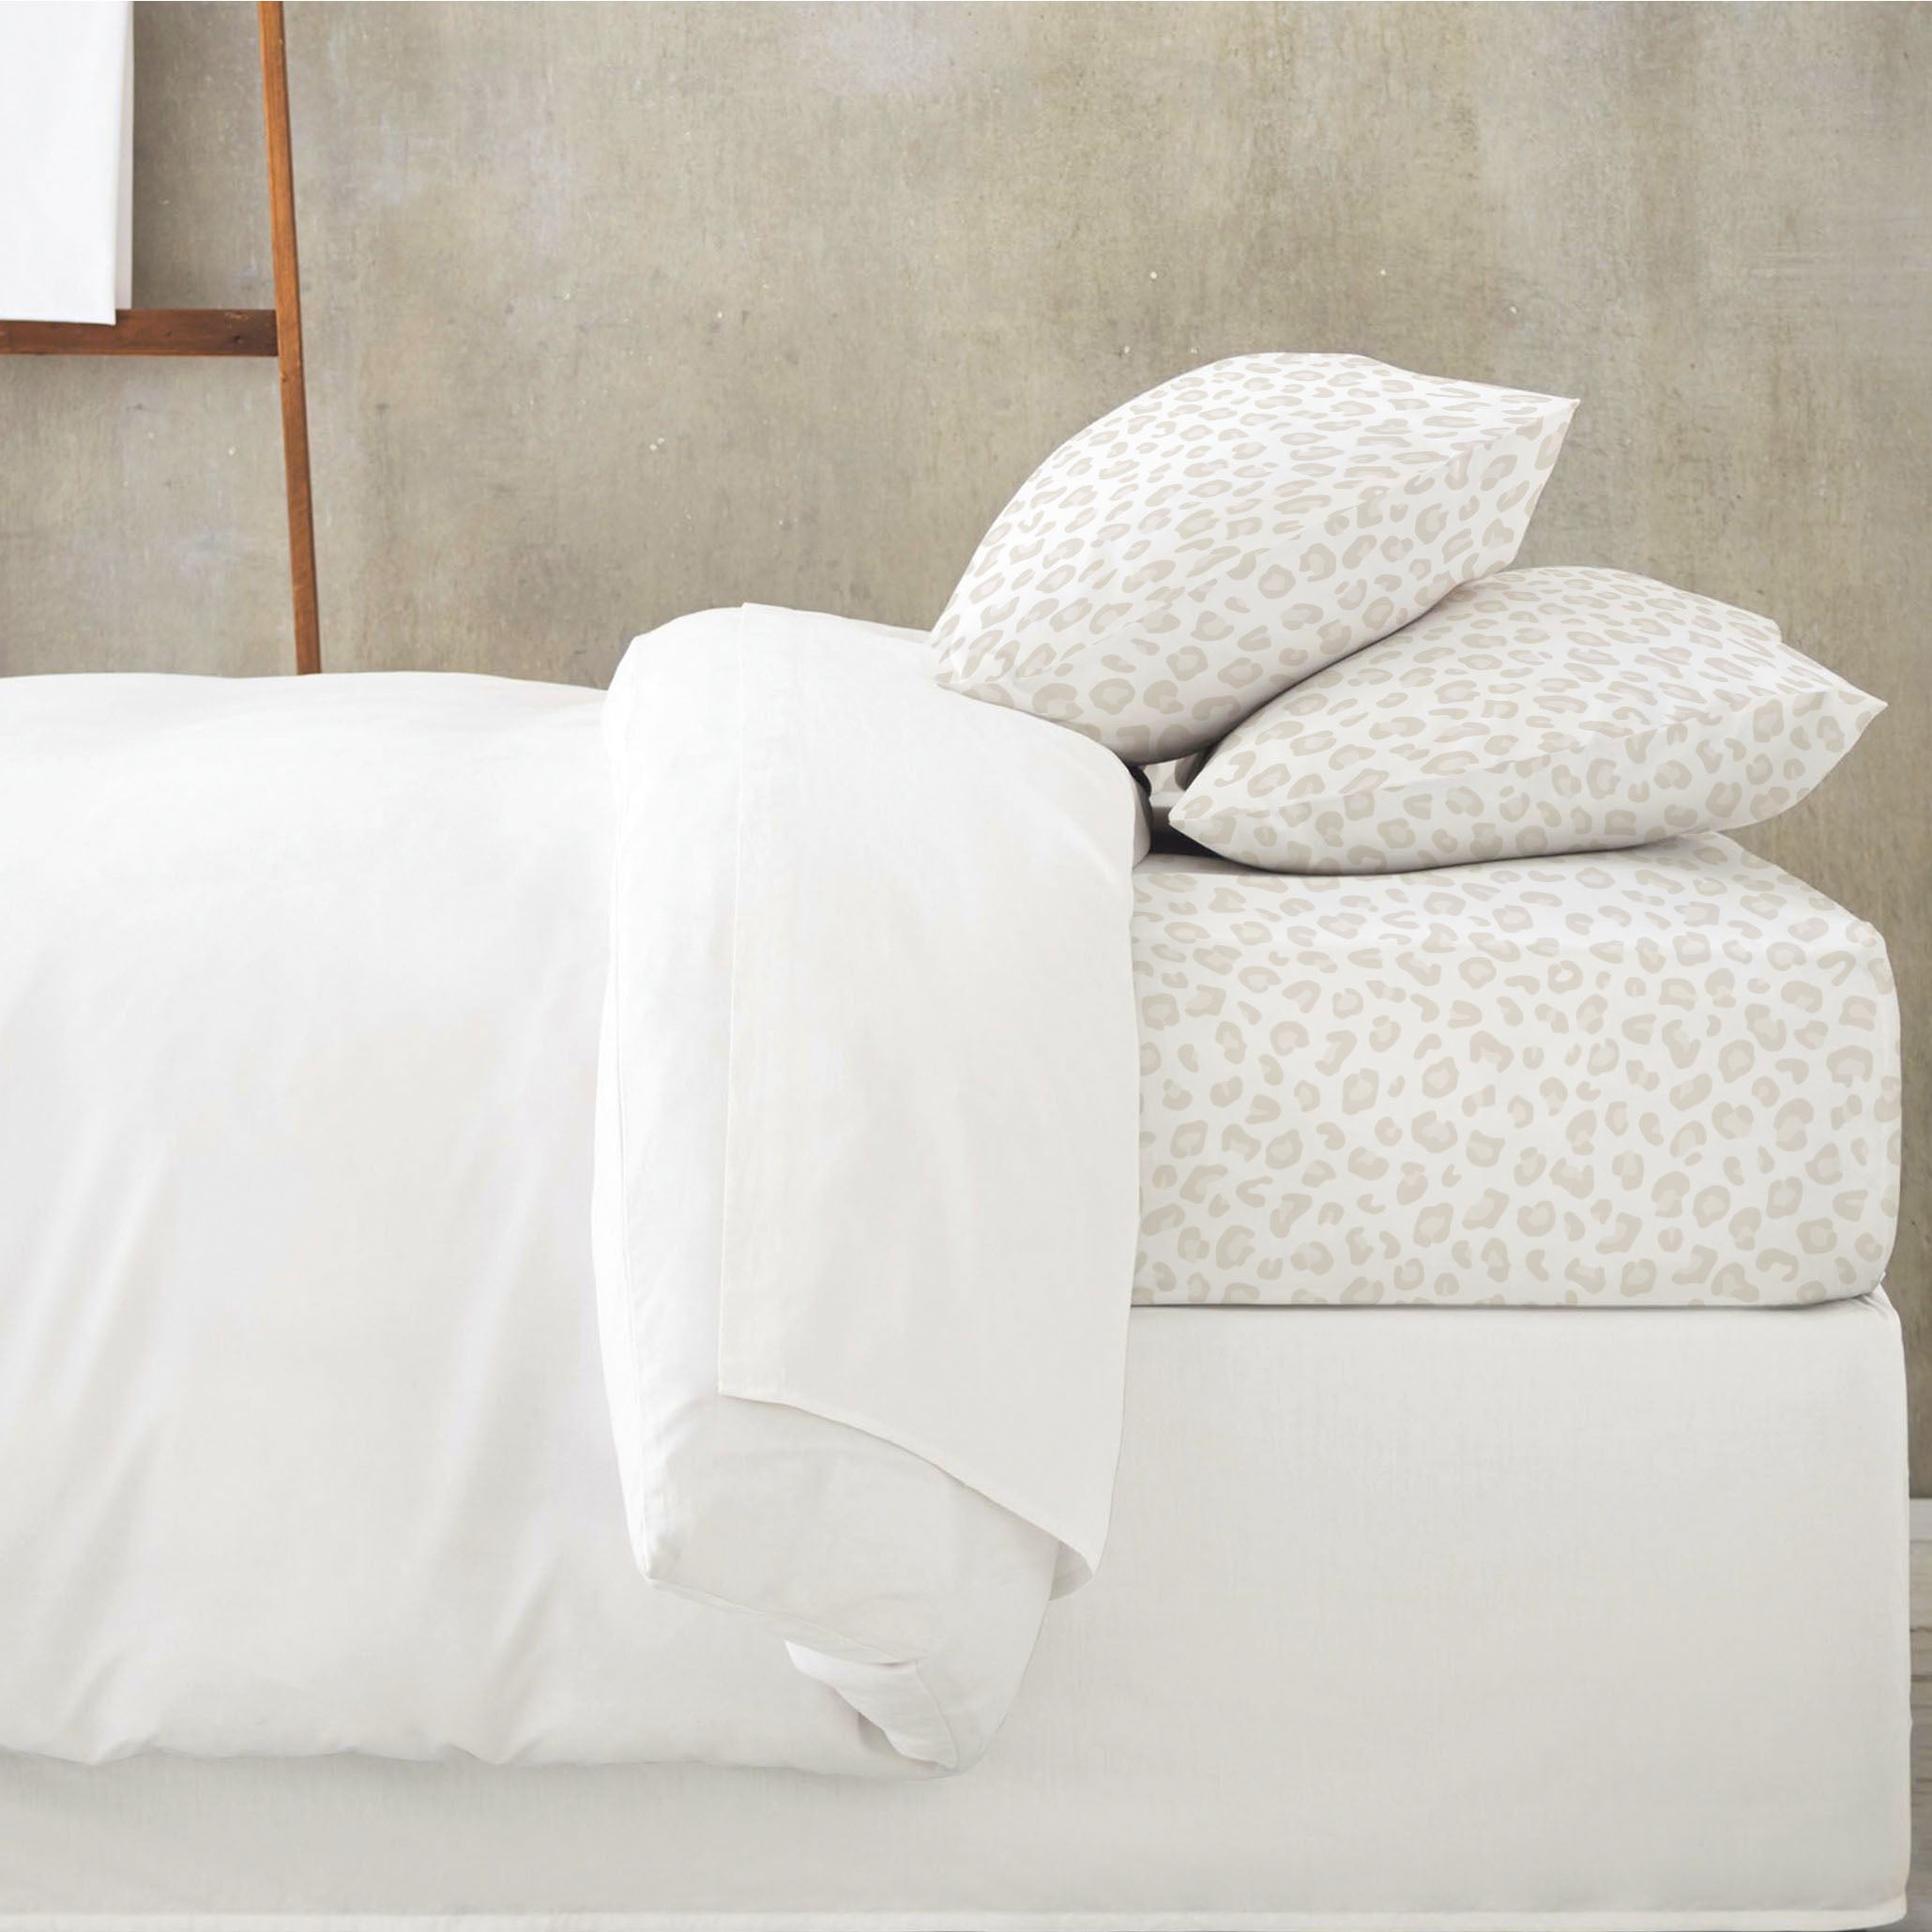 A neatly made bed with a Wild Organic Cotton Fitted Sheet Set and two pillows with a beige and white leopard print pattern against a simple grey concrete wall background. Brand Name: Makemake Organics